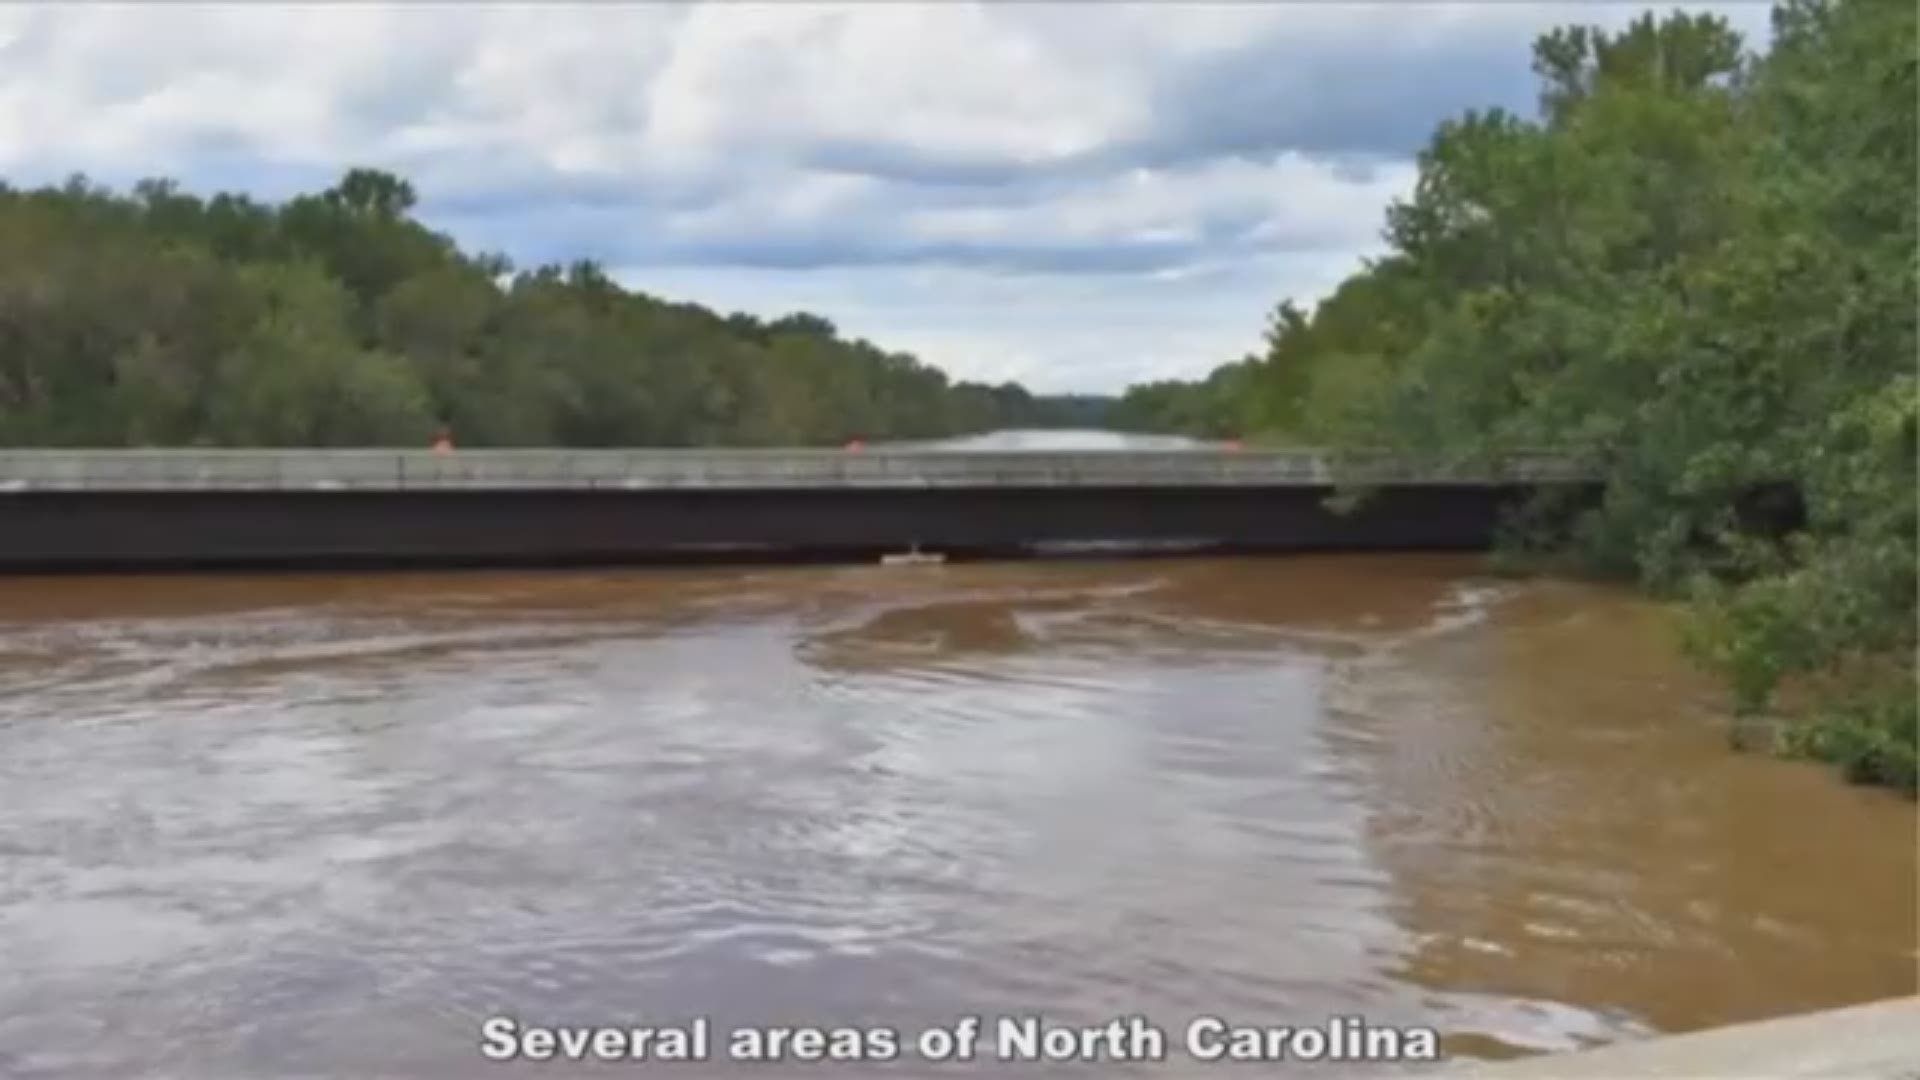 "Several areas in NC are still experiencing catastrophic flooding. Avoid driving over roads with standing or moving water, and do NOT drive around barricades or road closure signs.": NCSHP